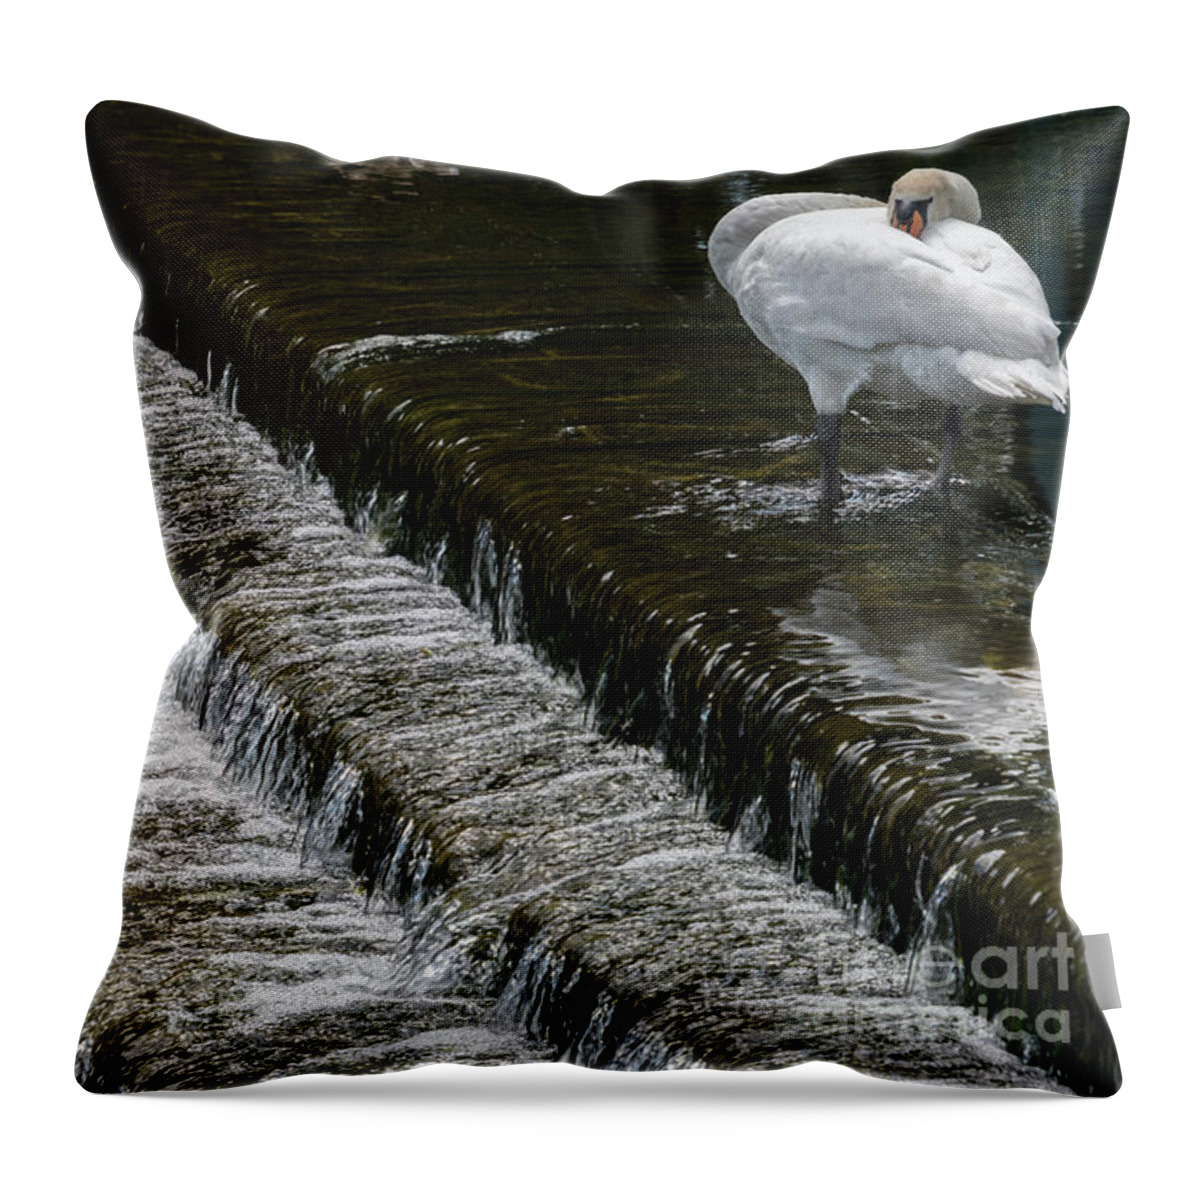 Water Throw Pillow featuring the photograph Close To The Edge by Wendy Wilton